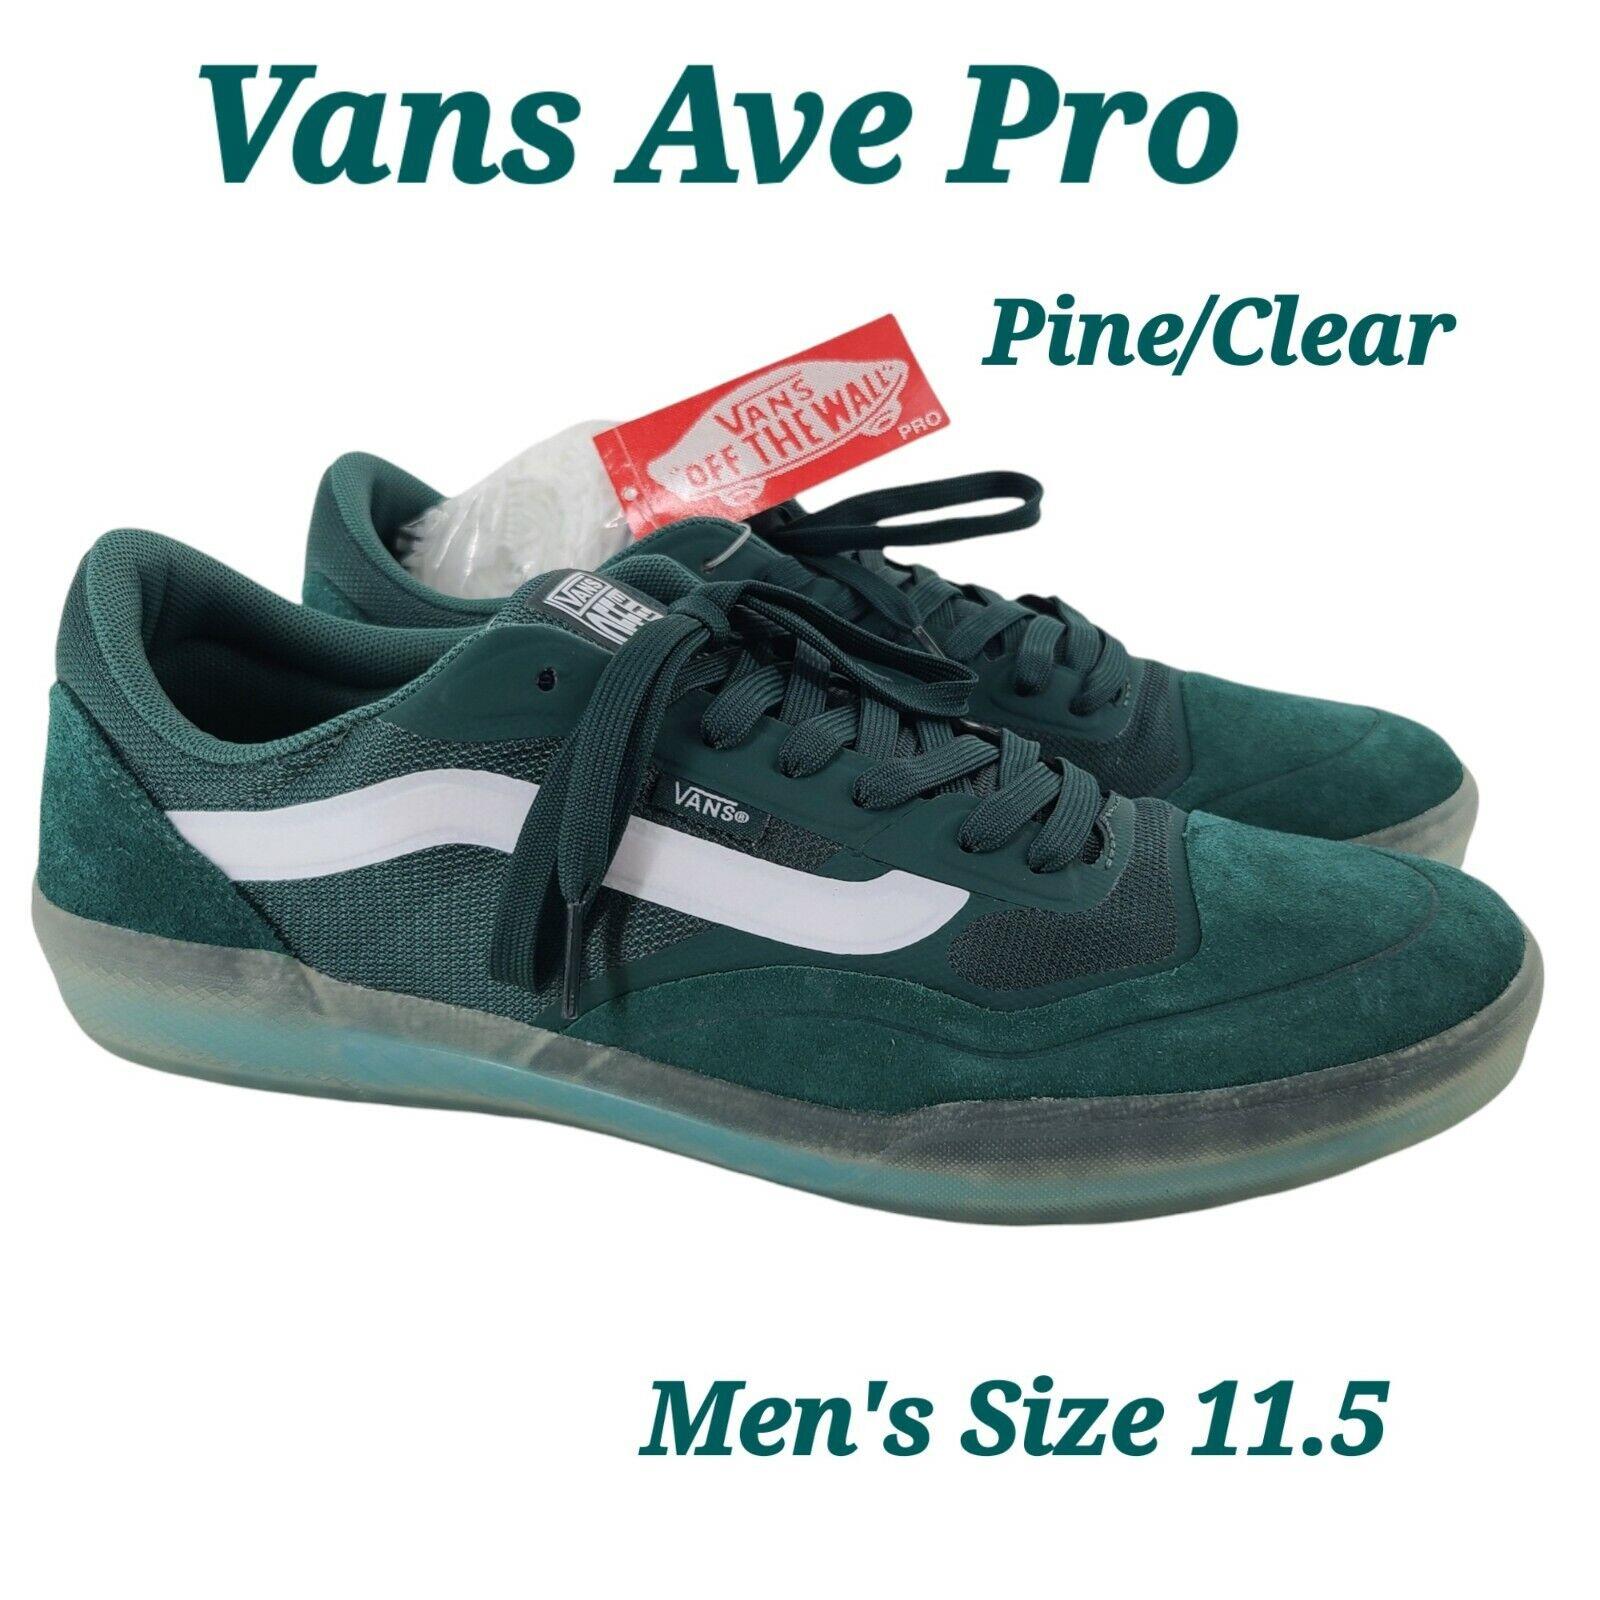 Vans Ave Pro Skate Shoes Mens US Size 11.5 Pine - Green/clear VN0A4BT70OS